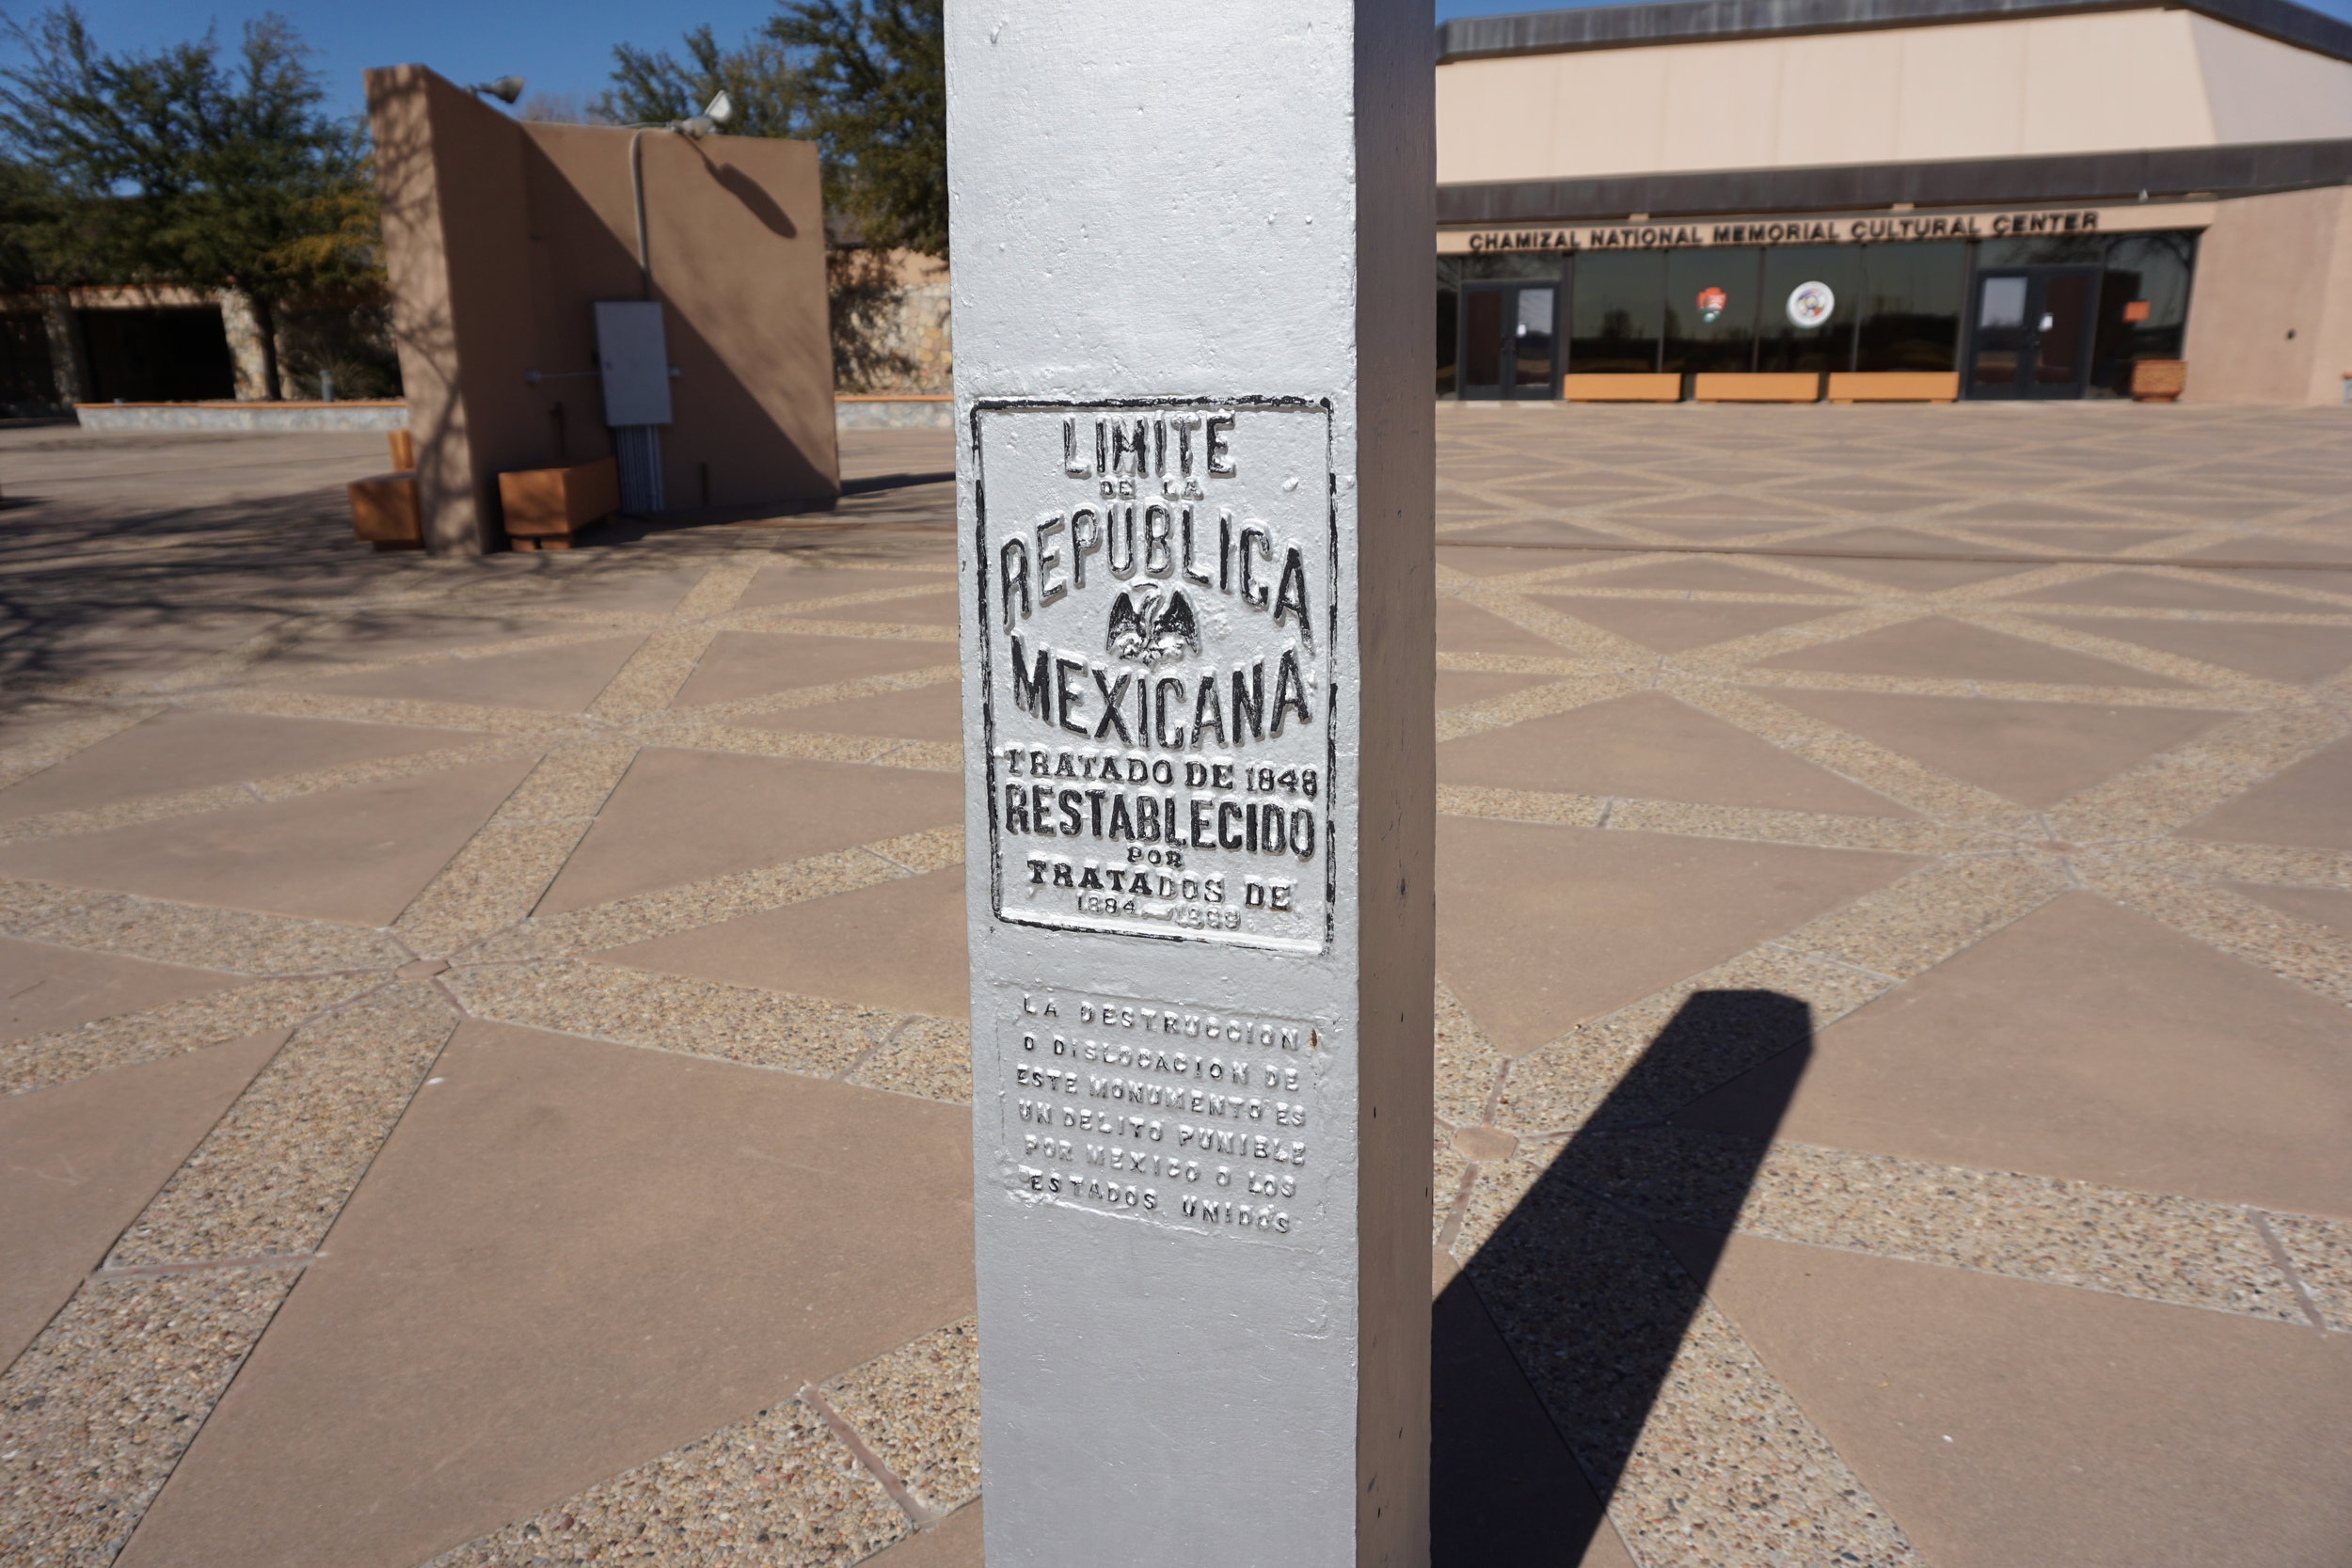 Commemorative monument of the border treaty at the border between El Paso Texas and Mexico